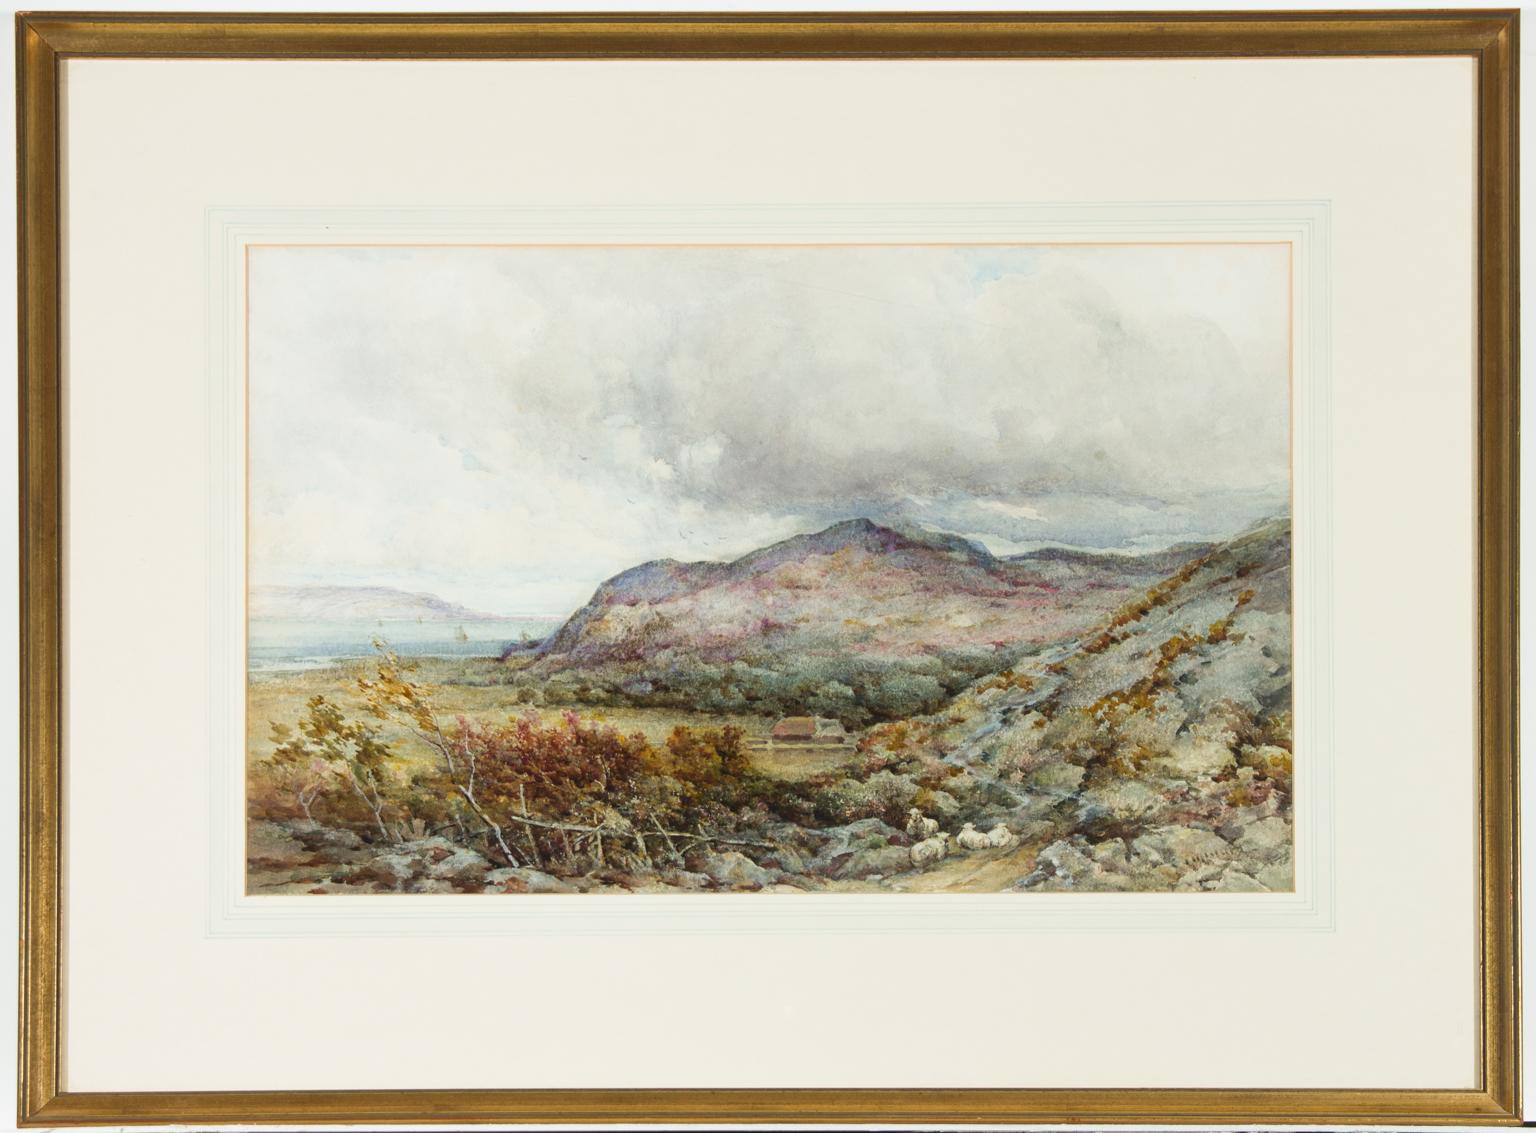 Unknown Landscape Art - Framed Early 20th Century Watercolour - Coastal Landscape with Grazing Sheep